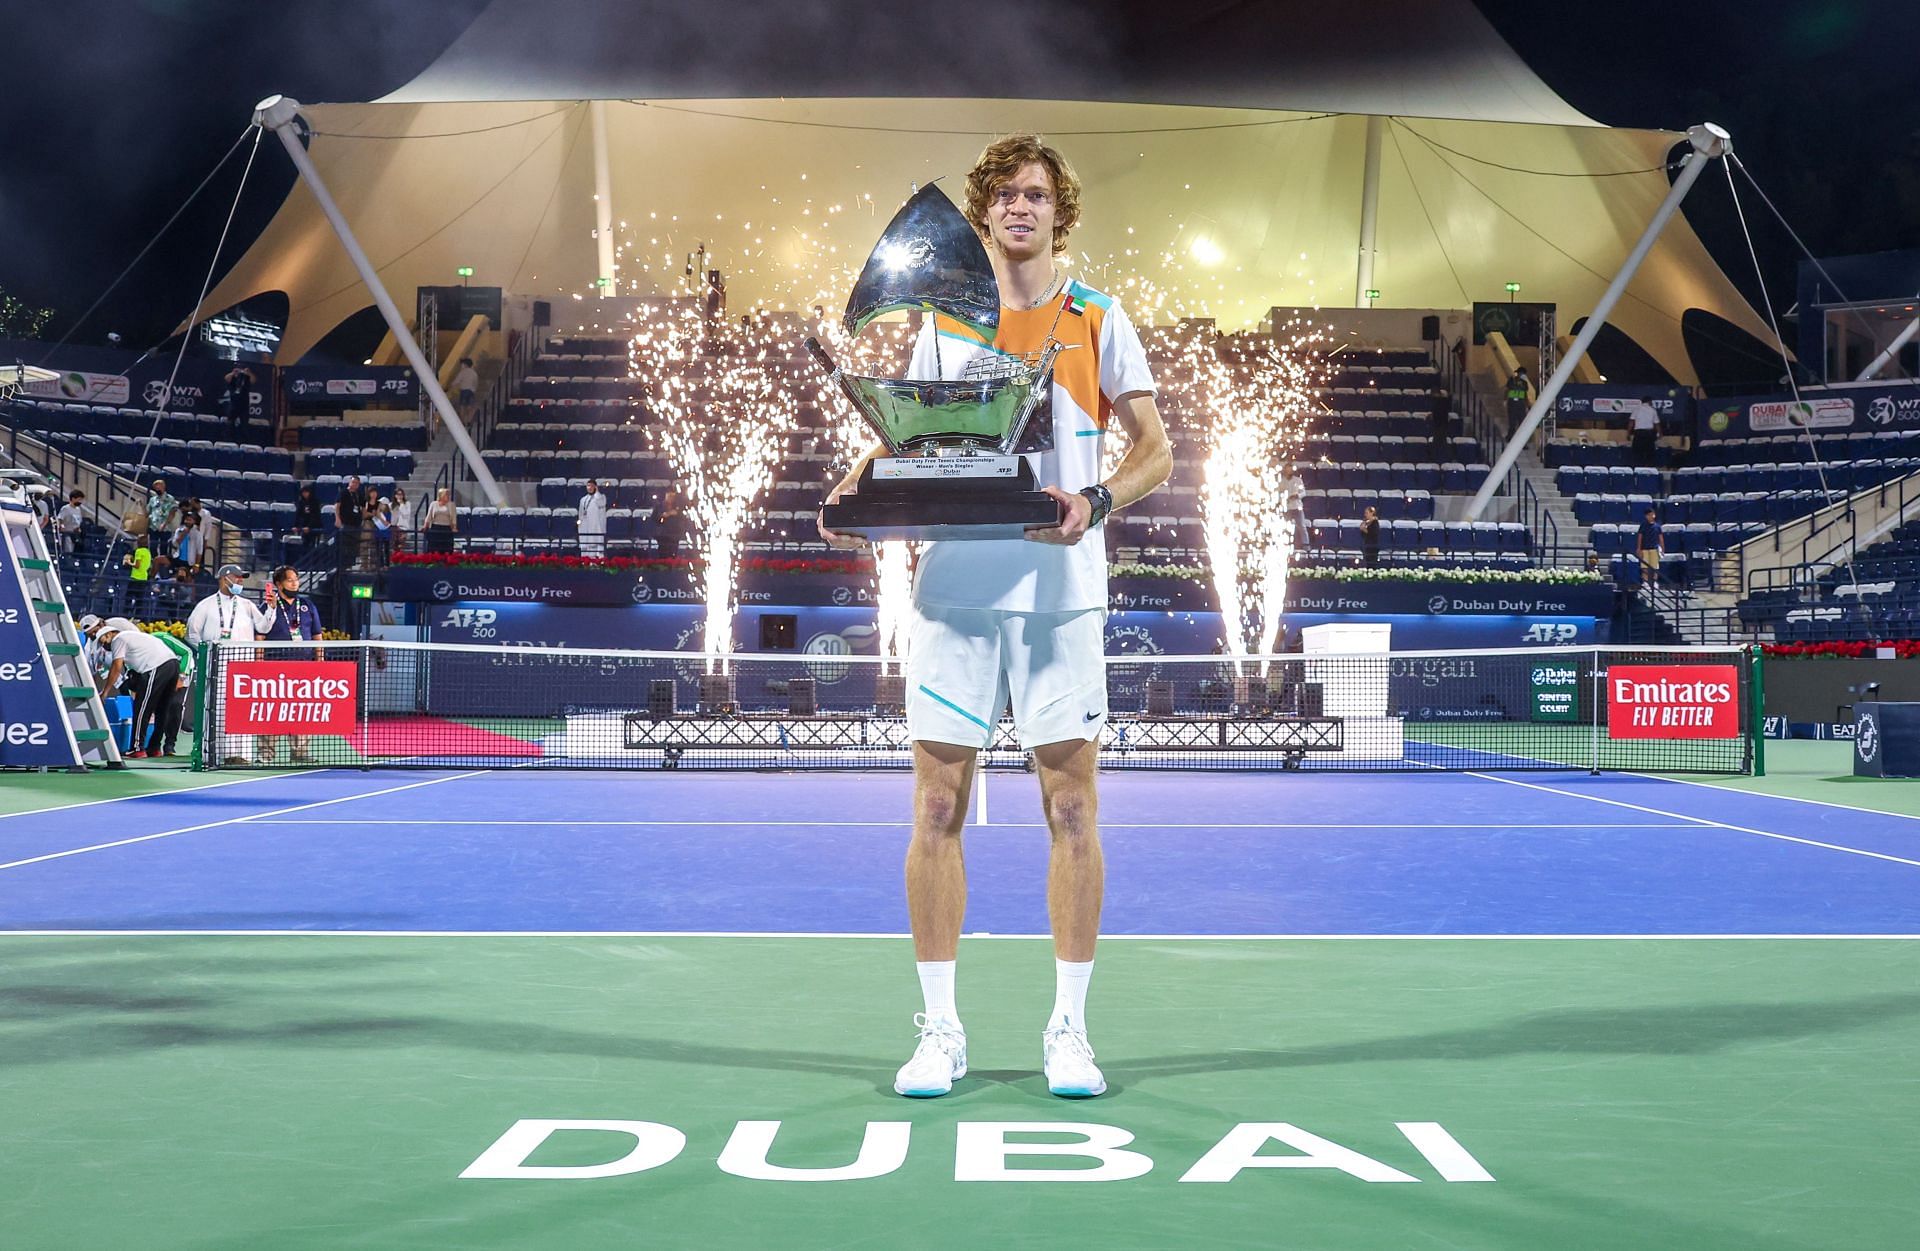 Andrey Rublev is the defending champion at the 2023 Dubai Tennis Championships.